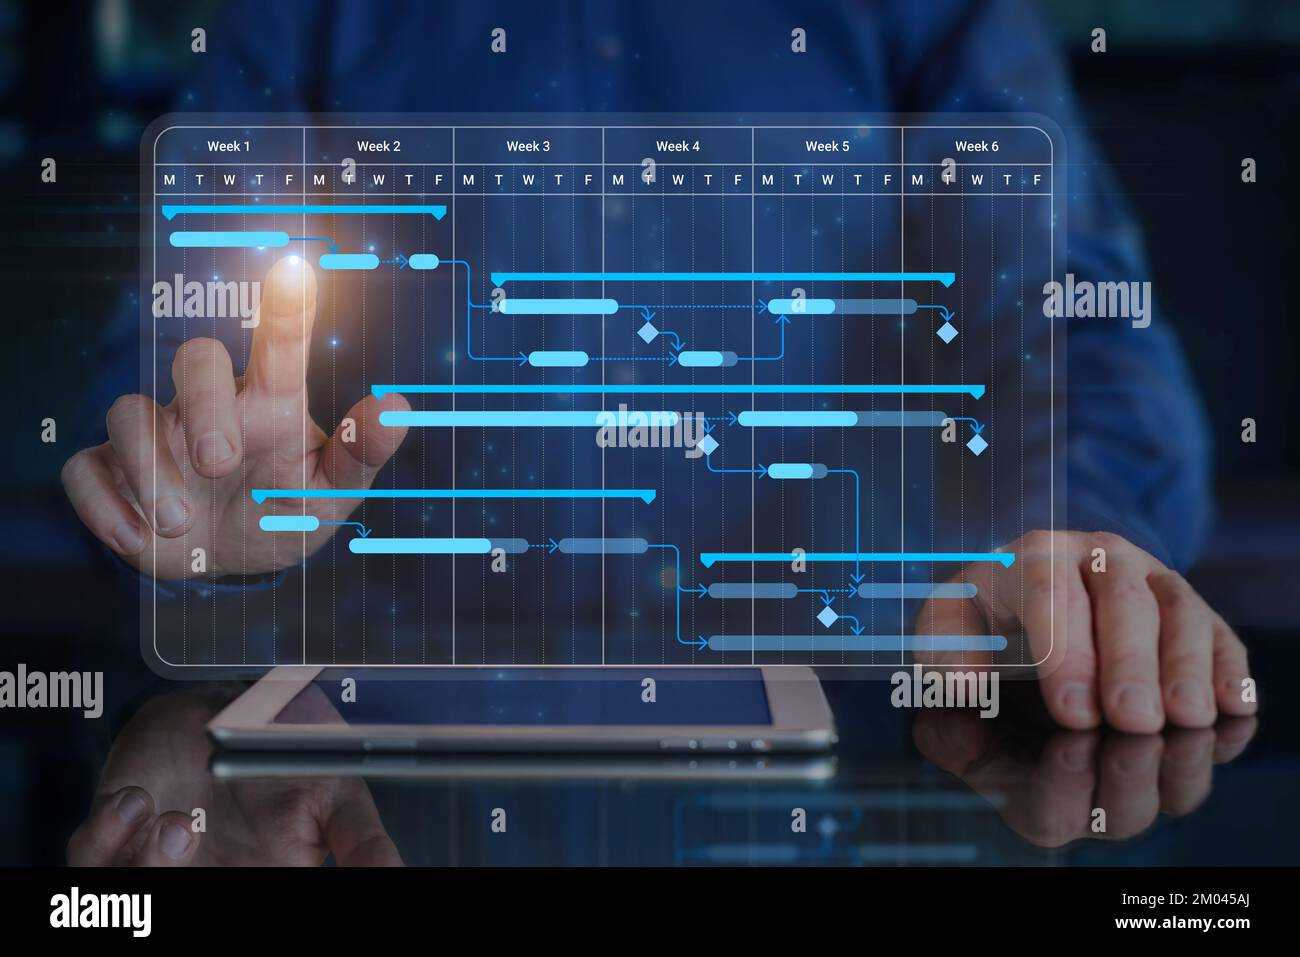 Project manager working with Gantt chart schedule to plan tasks and deliverables. Scheduling activities with planning software. Project management dia Stock Photo